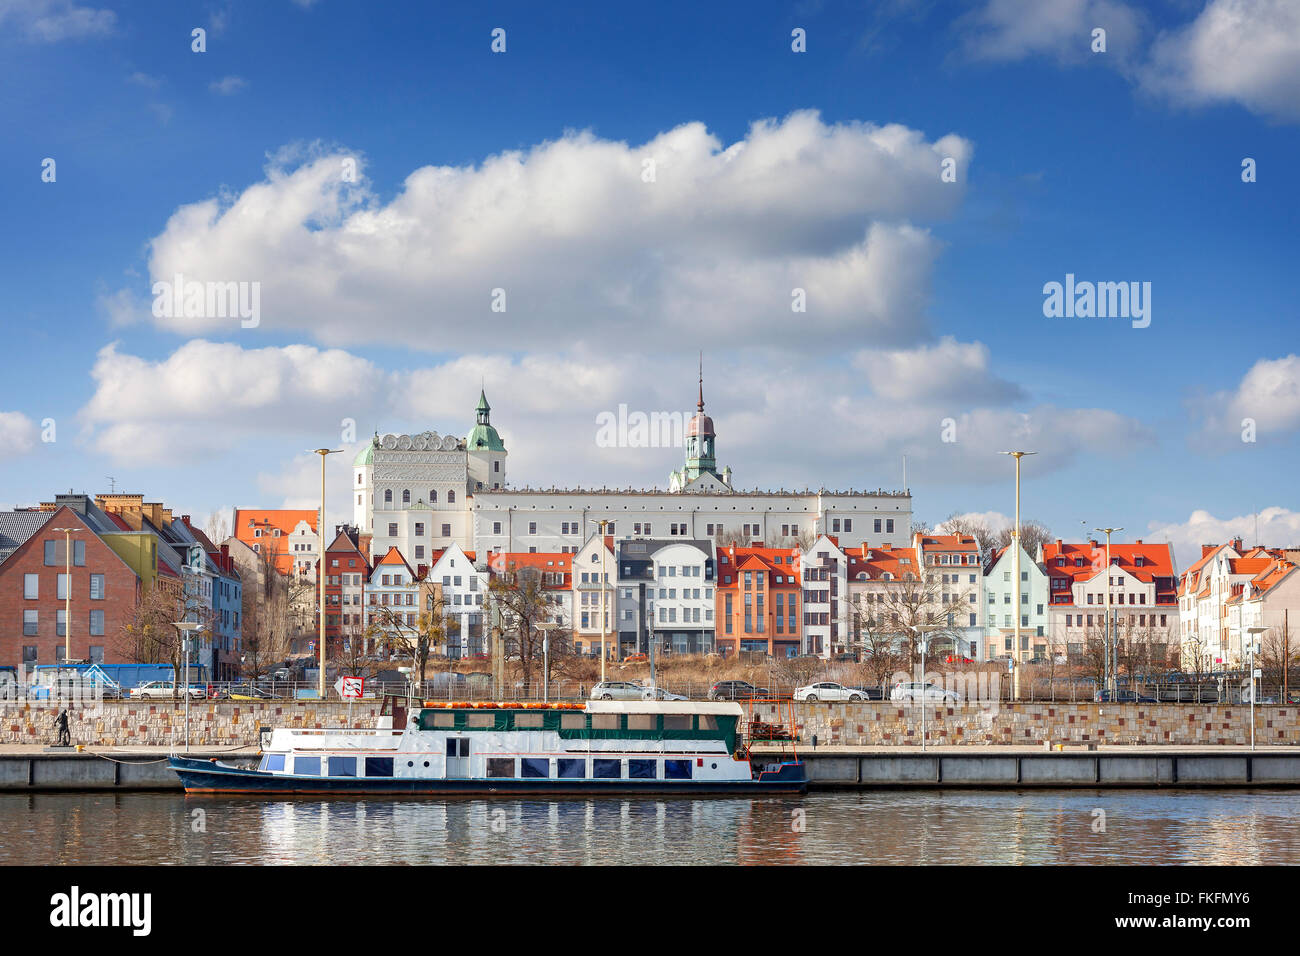 Szczecin old town seen from the Odra River, Poland. Stock Photo